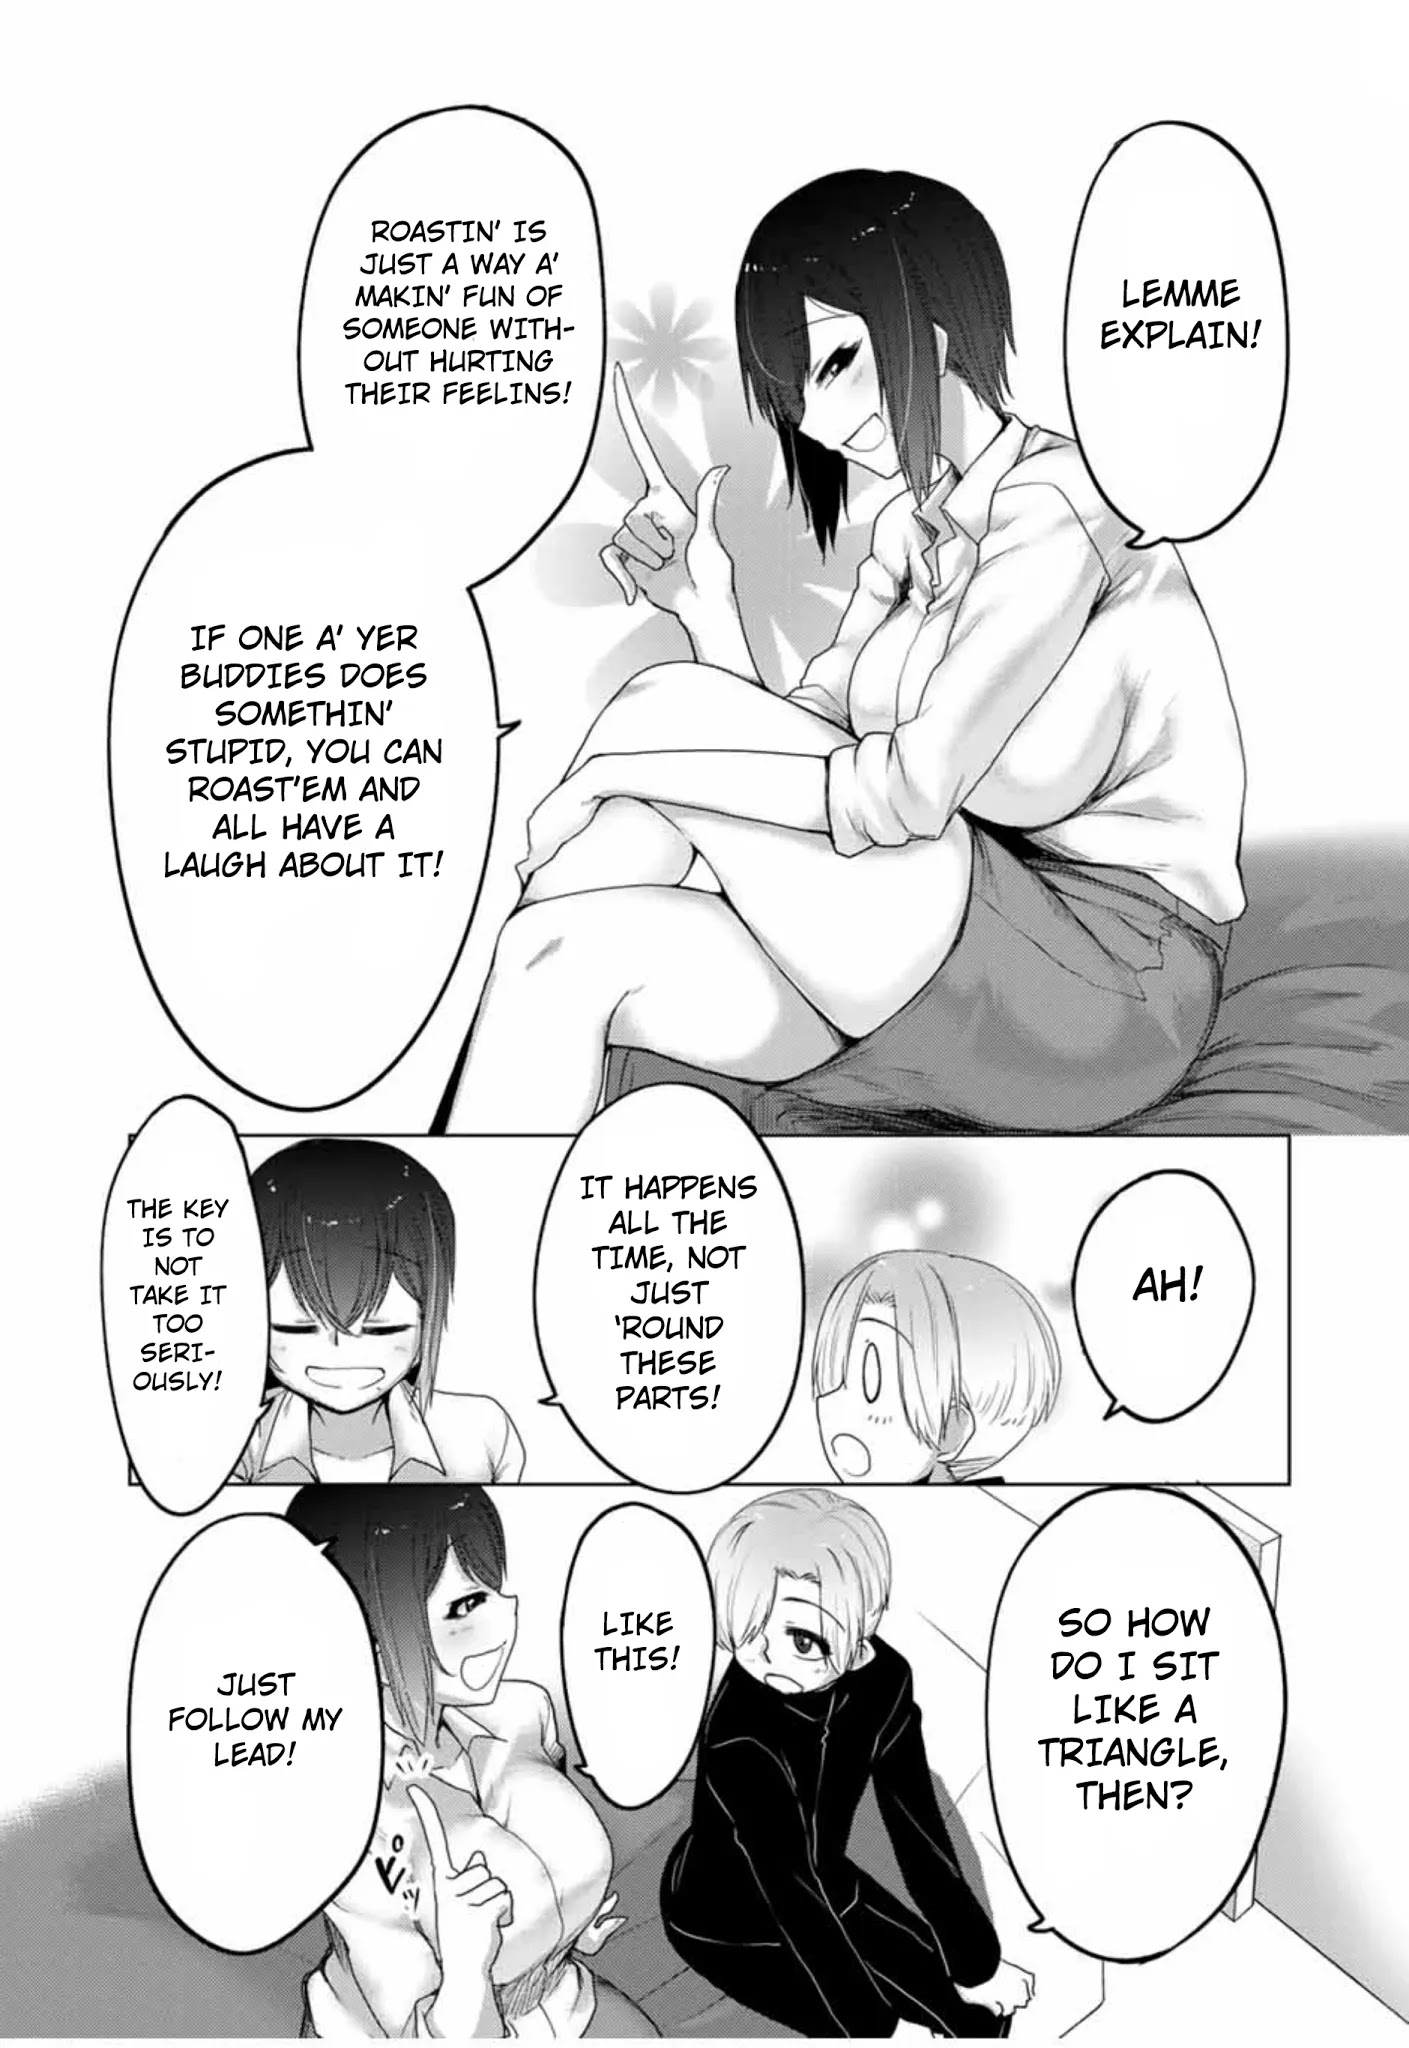 The Girl with a Kansai Accent and the Pure Boy - Chapter 18 Page 5